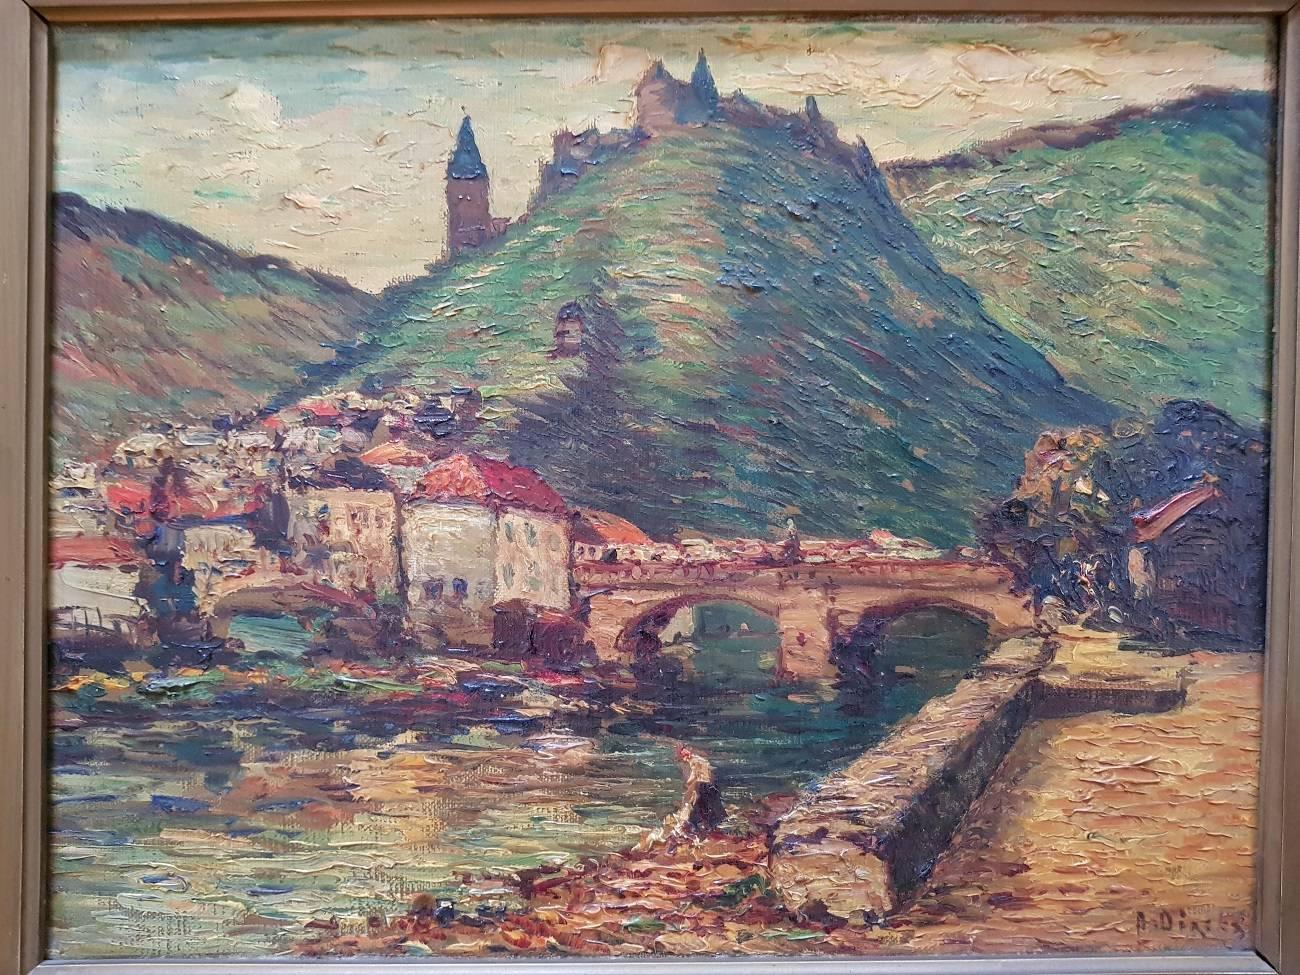 Oil on canvas signed lower right by the Dutch painter Antonius Bernardus Dirckx (1878-1927) representing the city of Vianden in Luxemburg, circa 1900 Framed in a beautiful gilded frame and on the back of the spiral old lot numbers of an